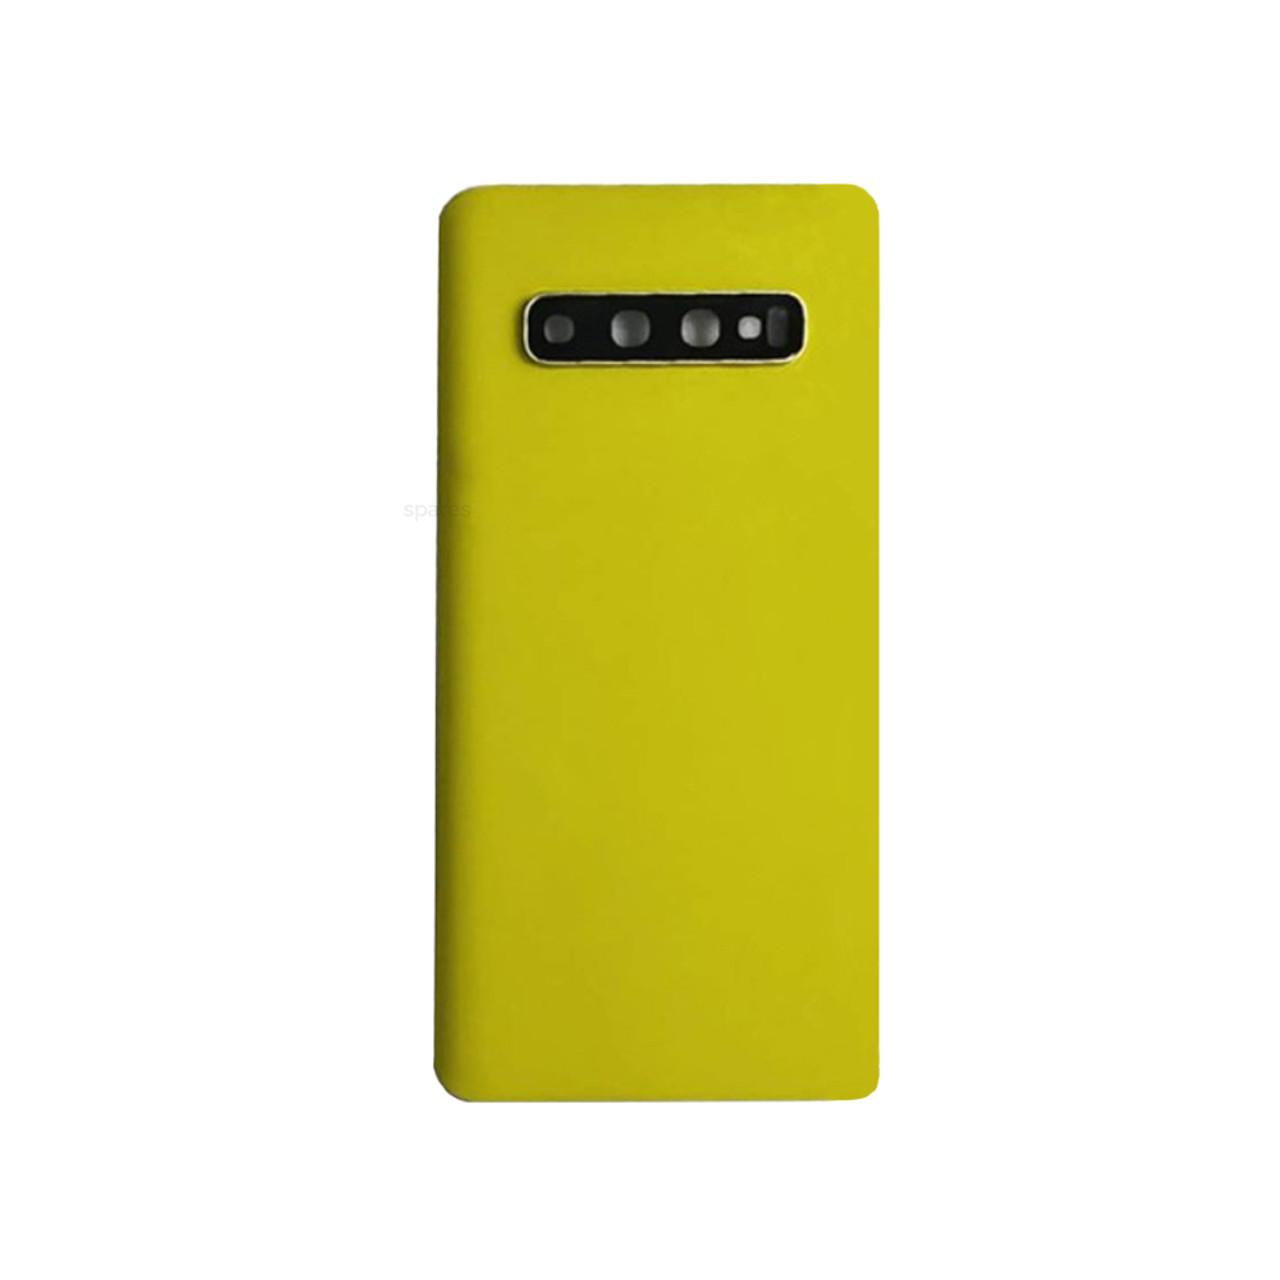 Galaxy S10 Plus SM-G975F Rear glass battery cover with camera lens Canary Yellow - Replacement